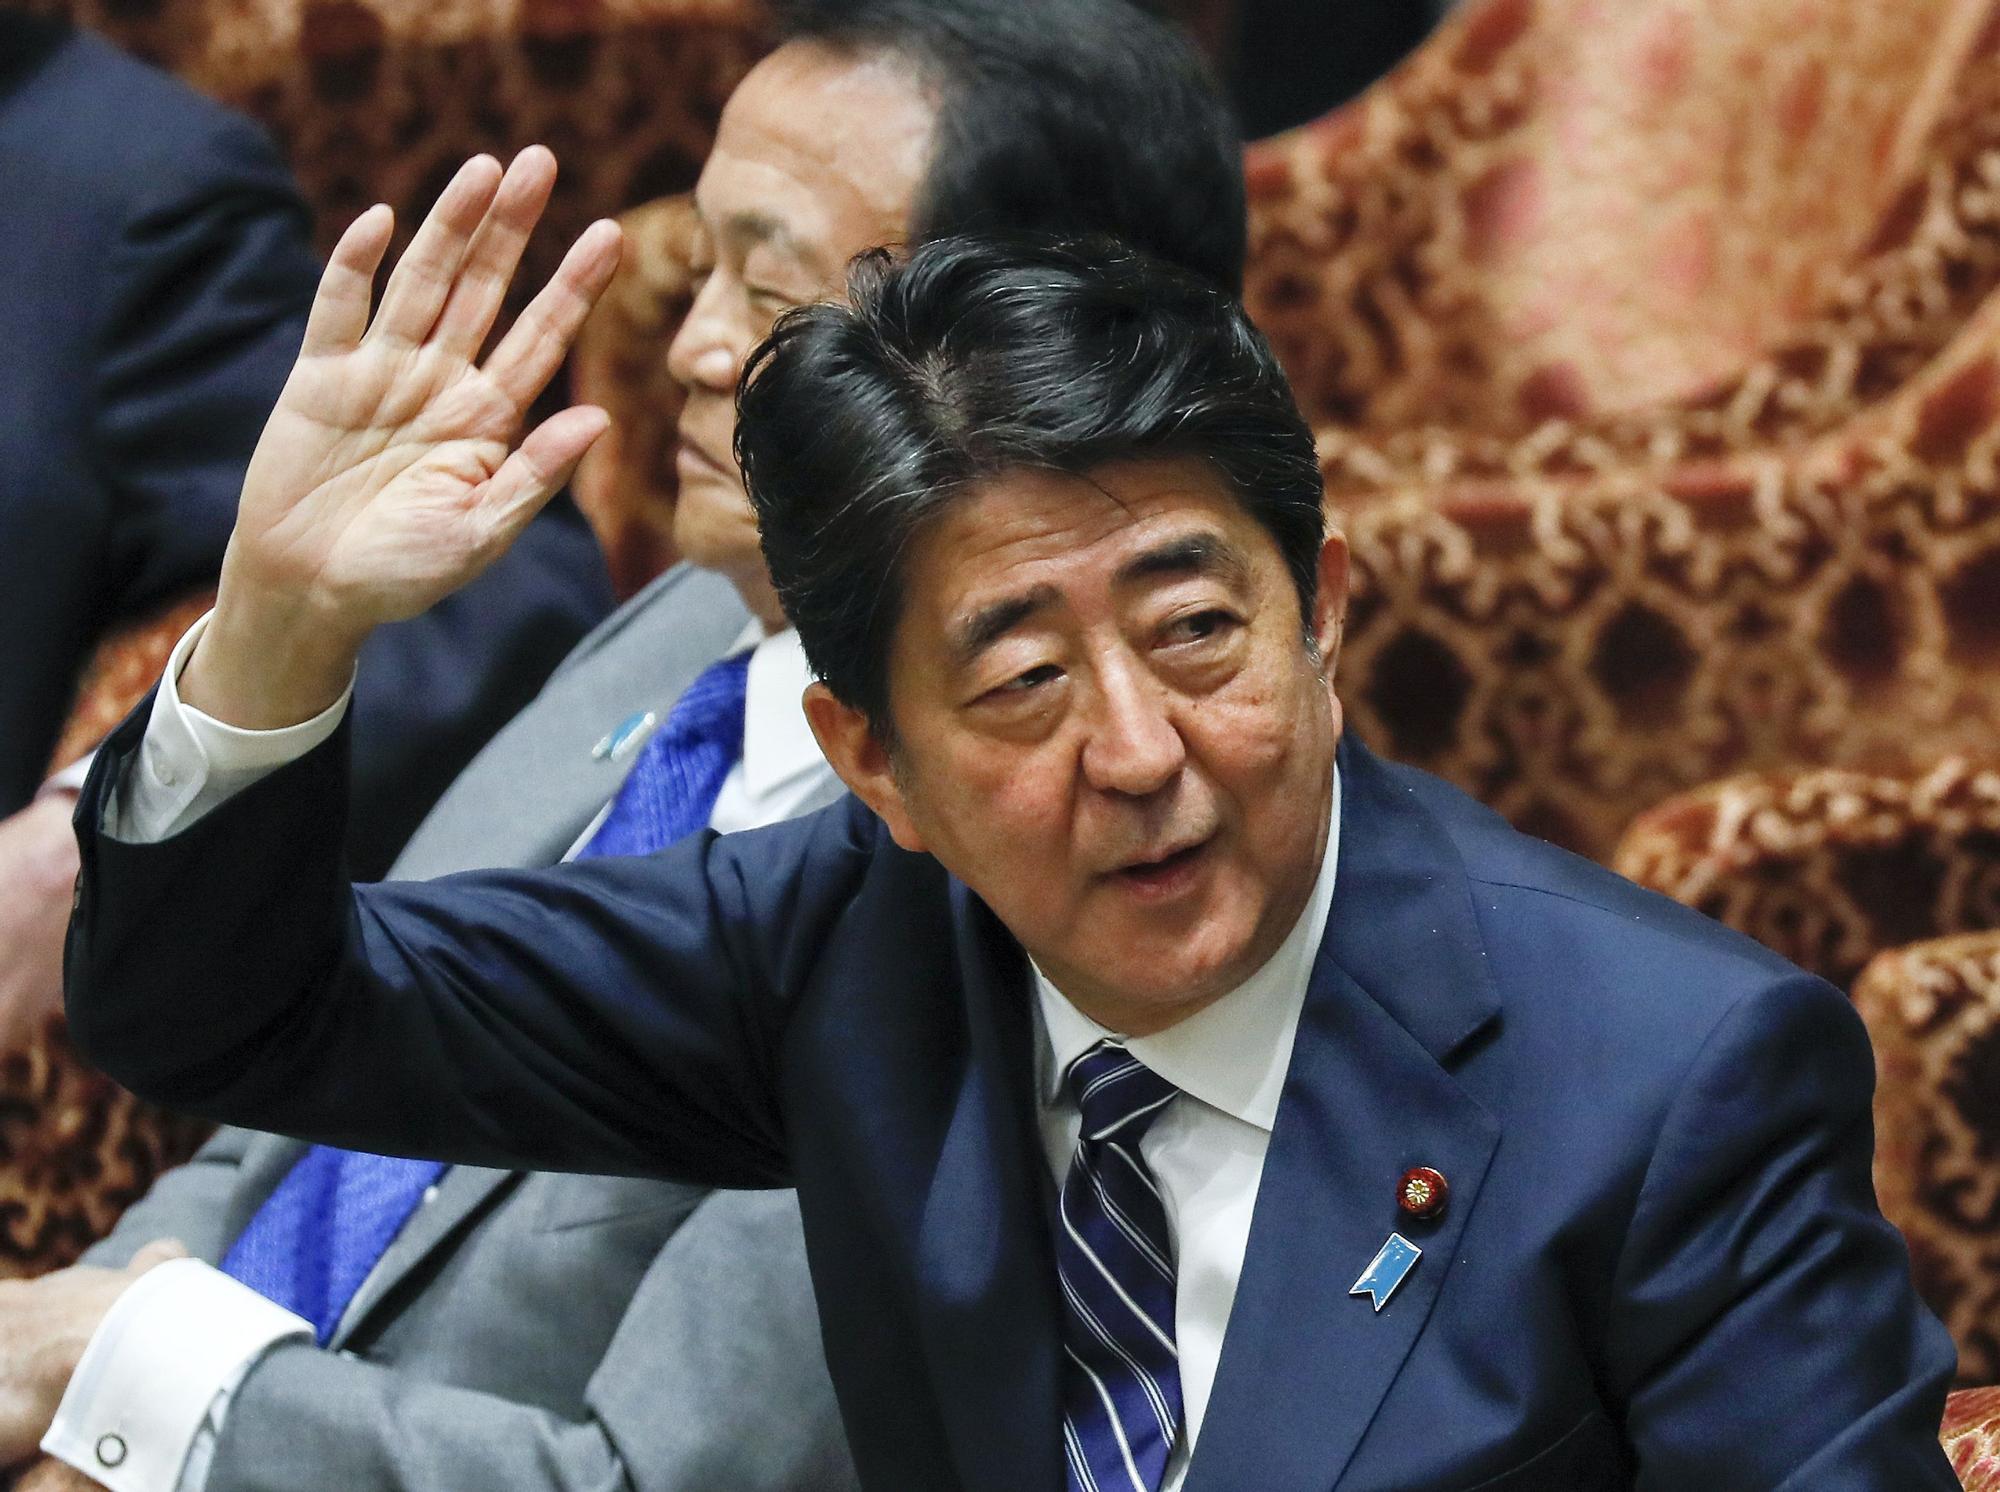 Japan's former Prime Minister Shinzo Abe dies after being shot